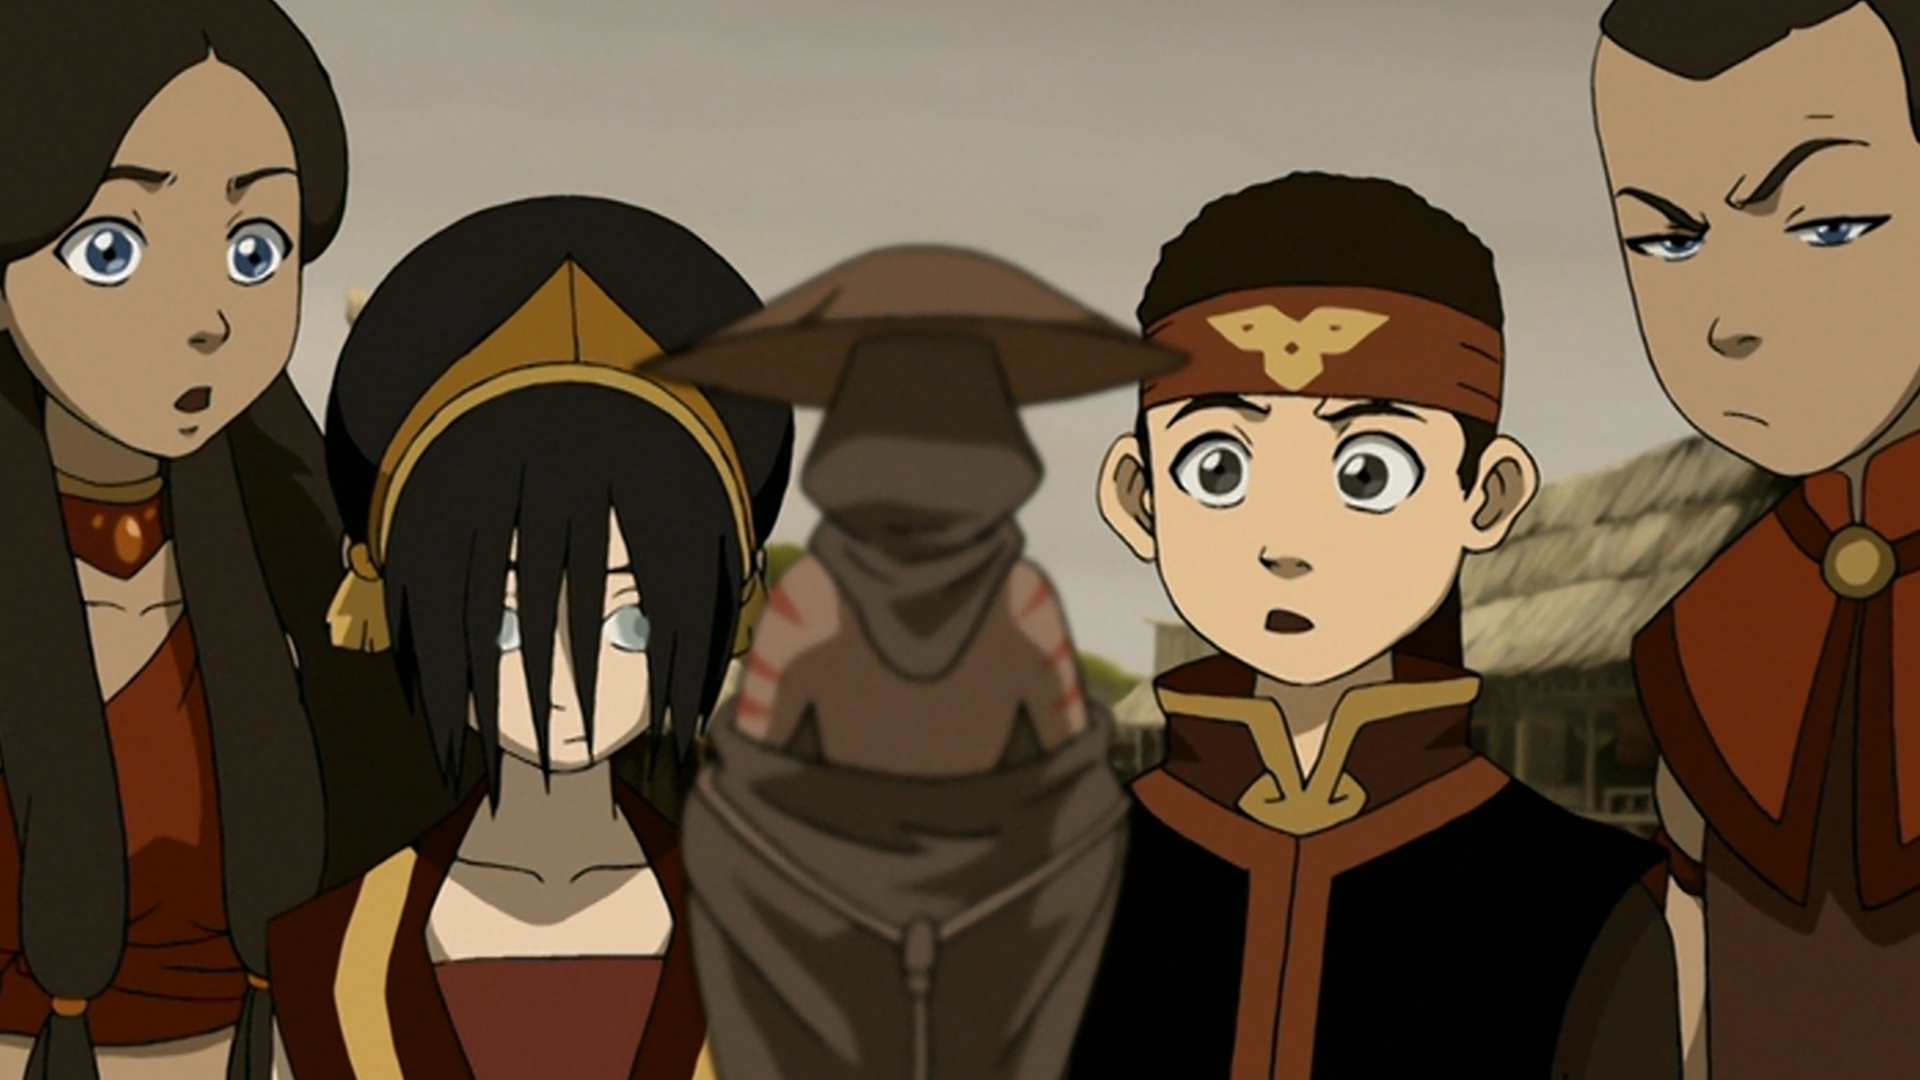 AVATAR The Last Airbender Season 3 Episode 16 The Southern Raiders from  avatar video Watch Video  HiFiMovco